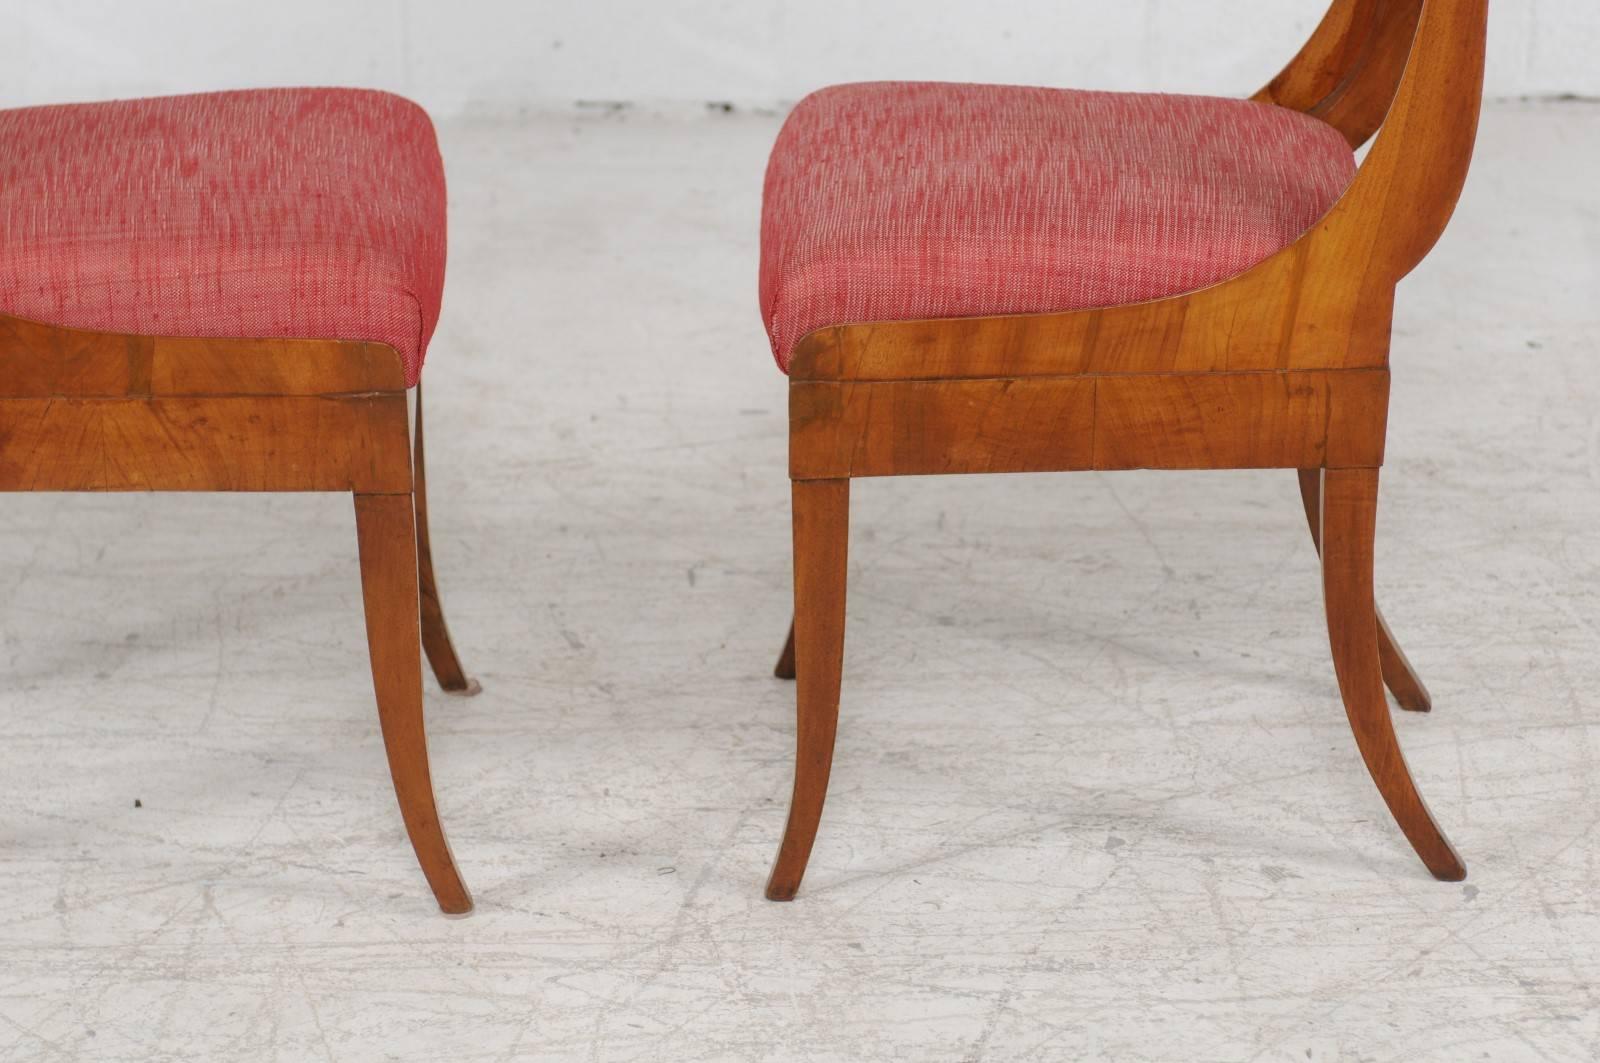 Set of Four 1840s Austrian Biedermeier Period Chairs with Bookmarked Veneer For Sale 4